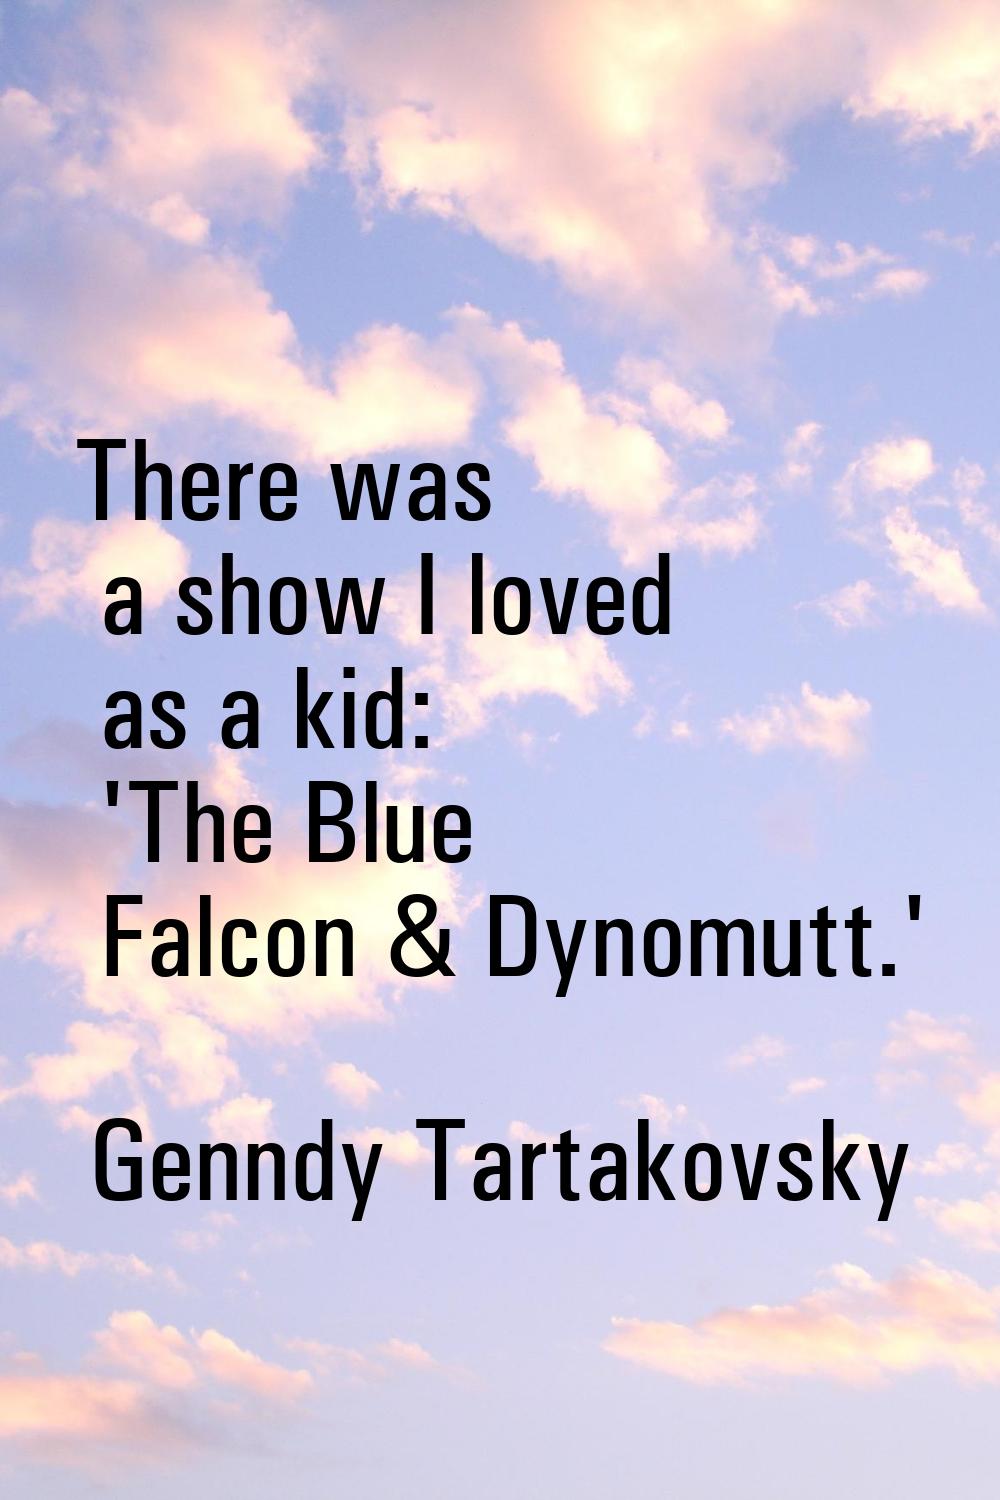 There was a show I loved as a kid: 'The Blue Falcon & Dynomutt.'